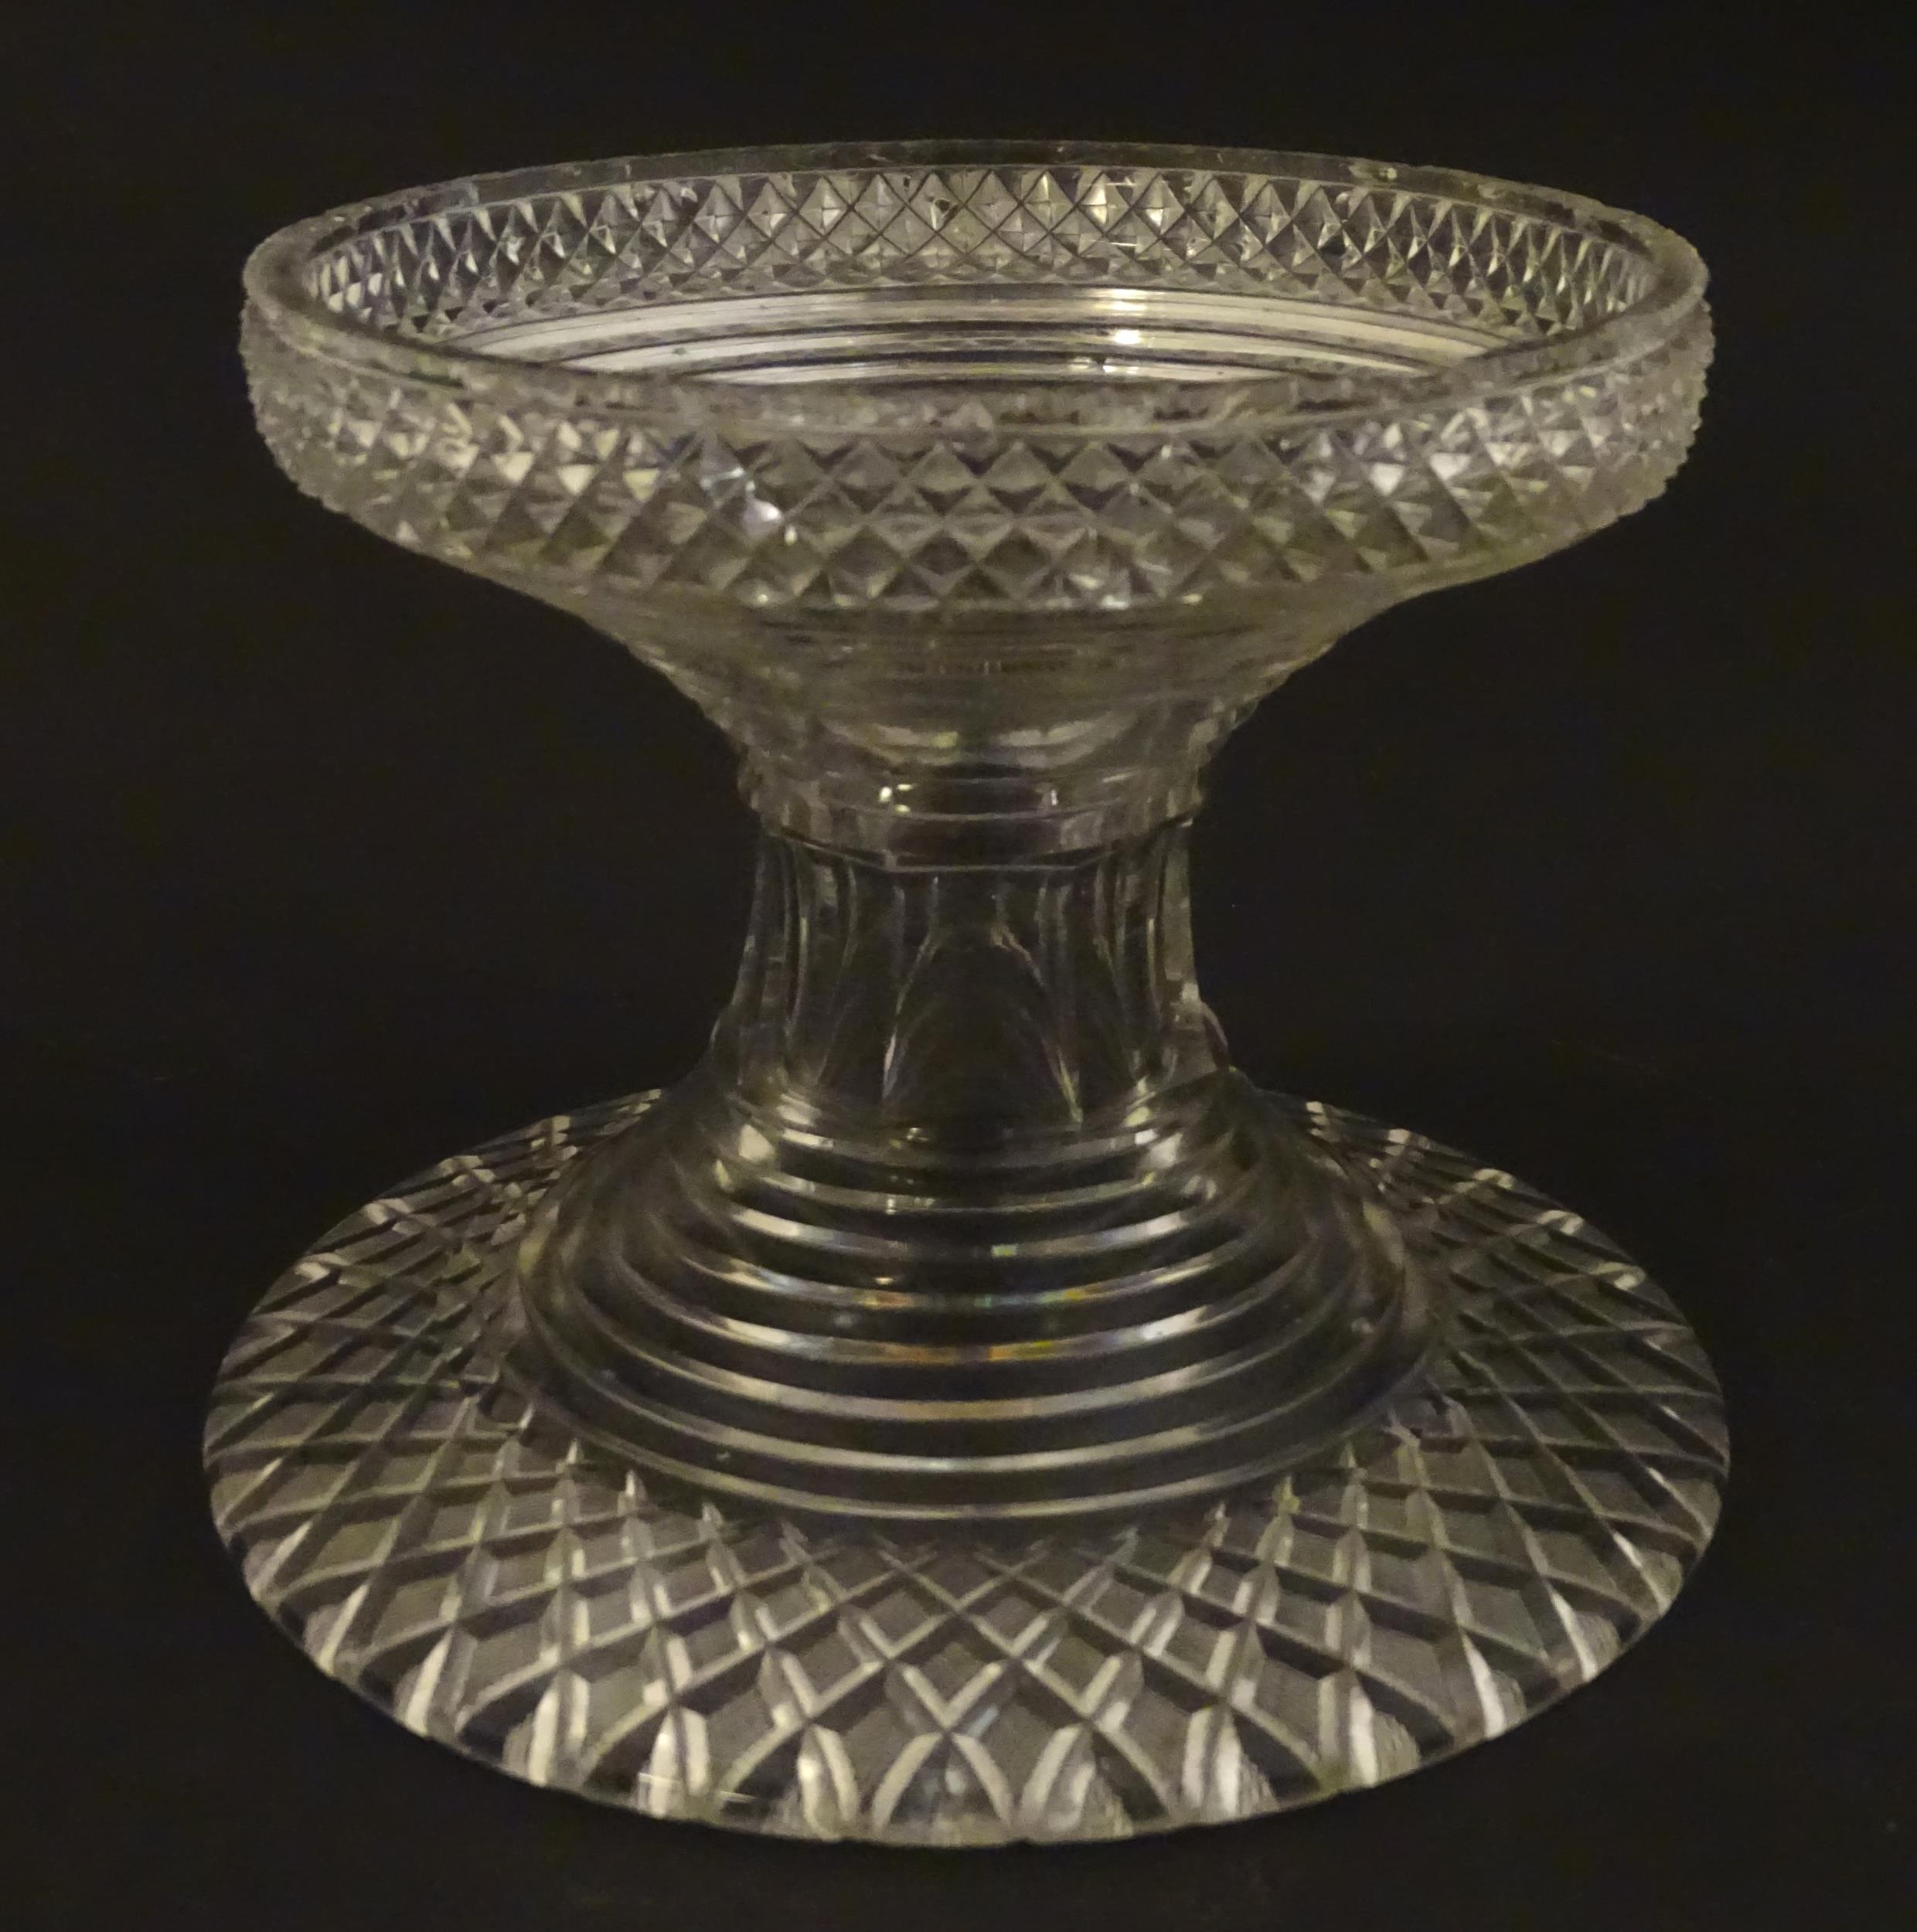 A 19thC cut glass pineapple stand with wide flared foot cut with a hobnail band rising to a - Image 2 of 6